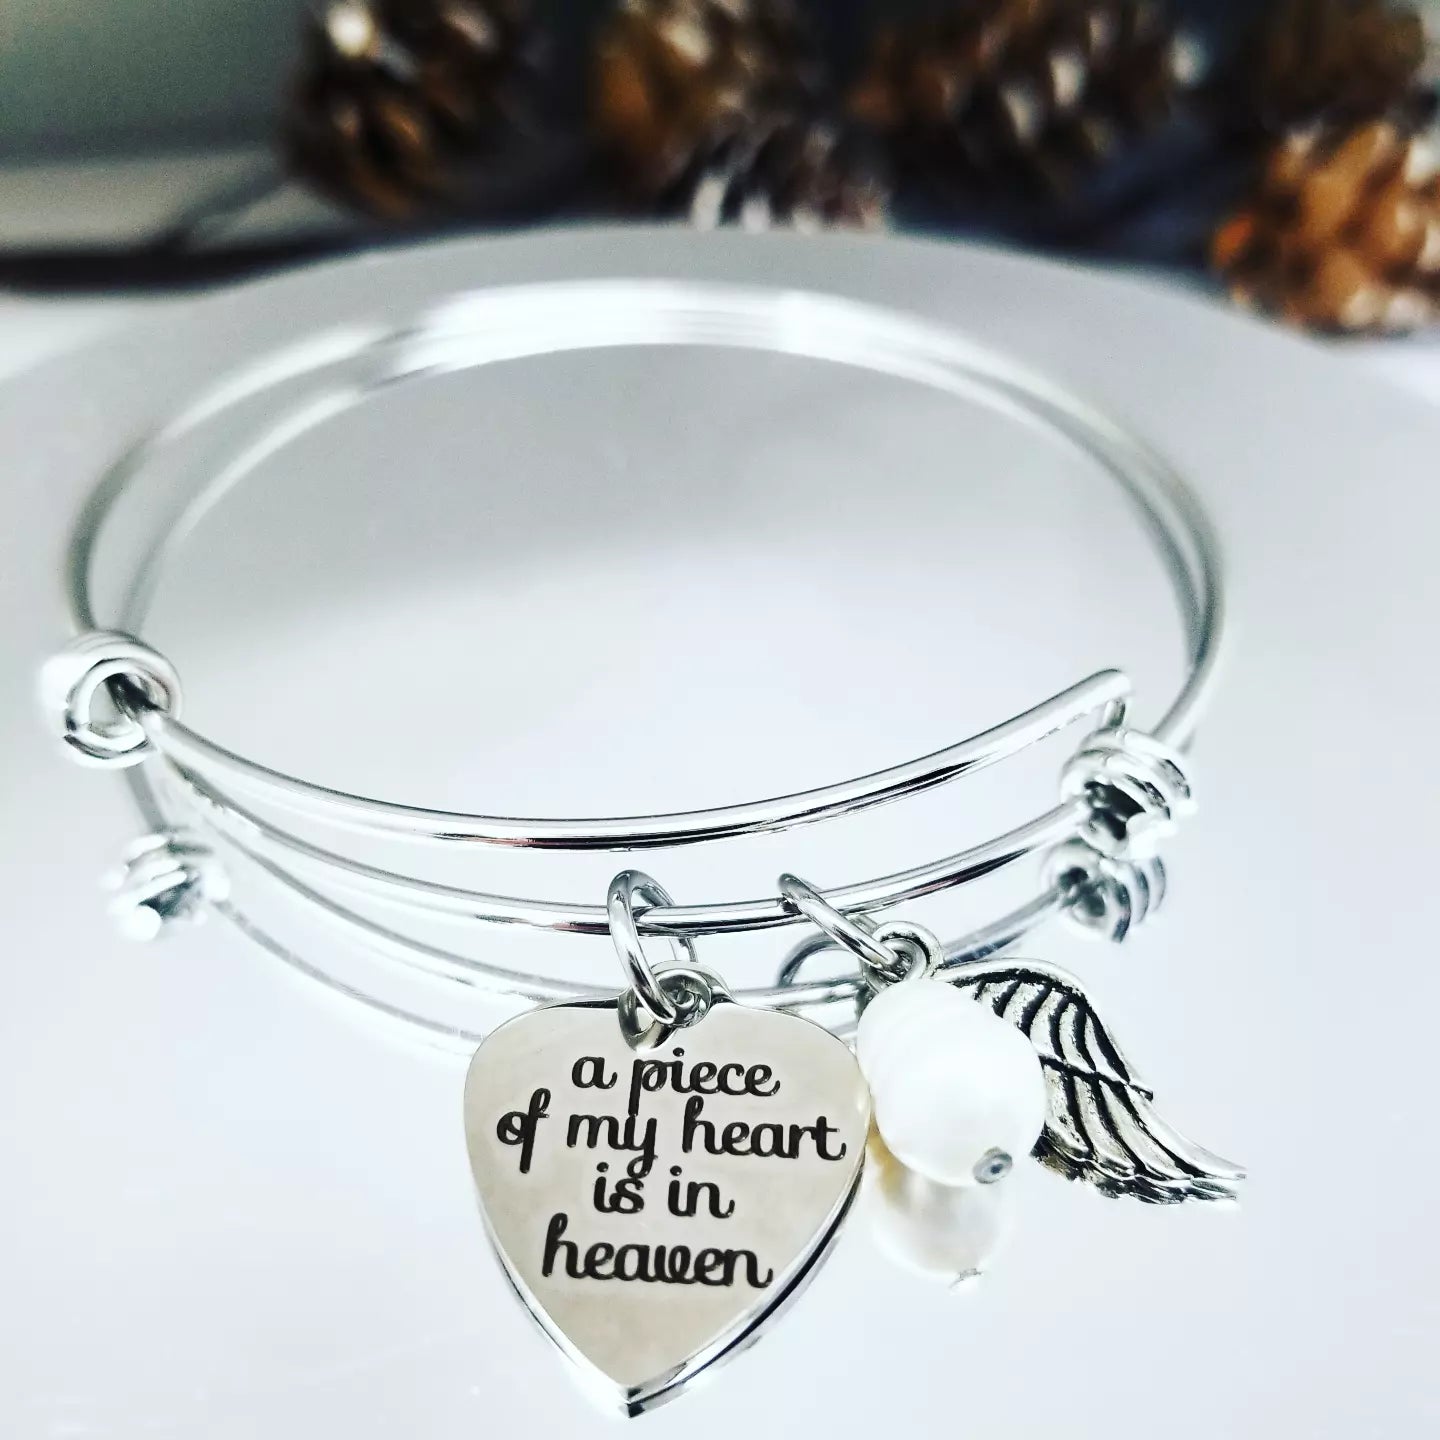 A Piece of my Heart is in Heaven, Bangle bracelet, Pregnancy and Infant Loss, Memorial Jewelry